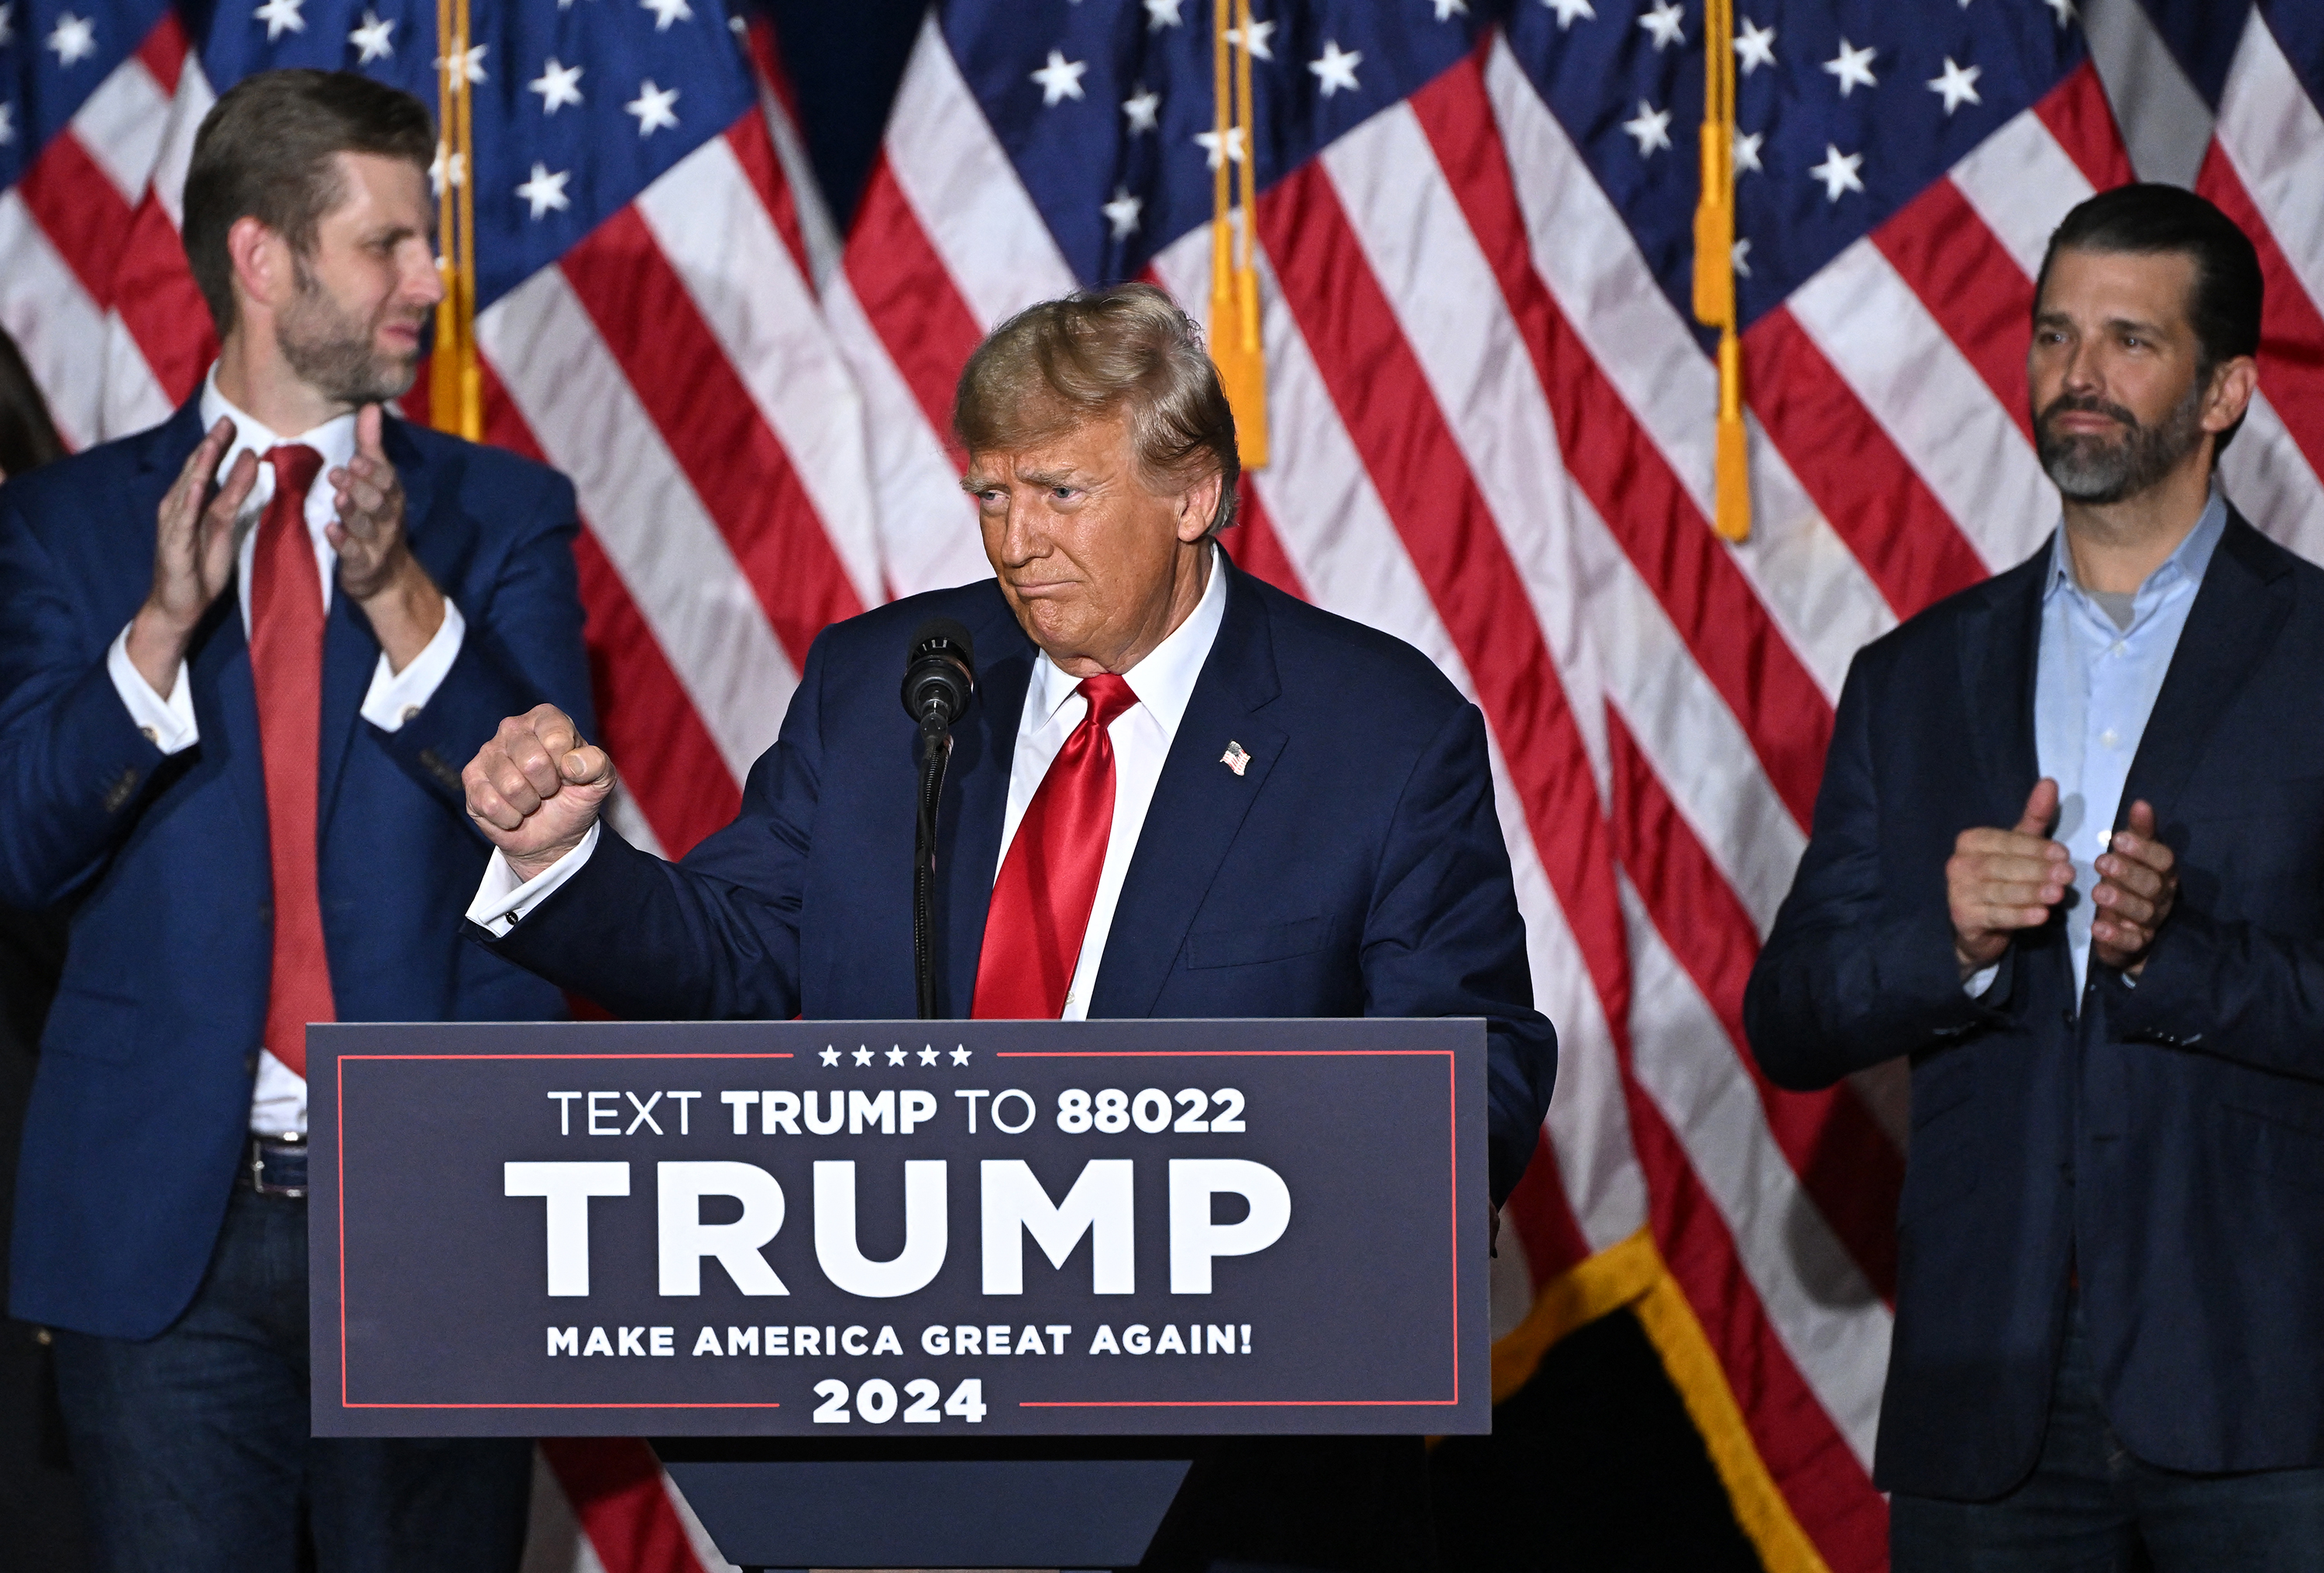 Former US President and Republican presidential candidate Donald Trump, with sons Eric (L) and Donald (R), speaks at a watch party during the 2024 Iowa Republican presidential caucuses in Des Moines, Iowa, on January 15.